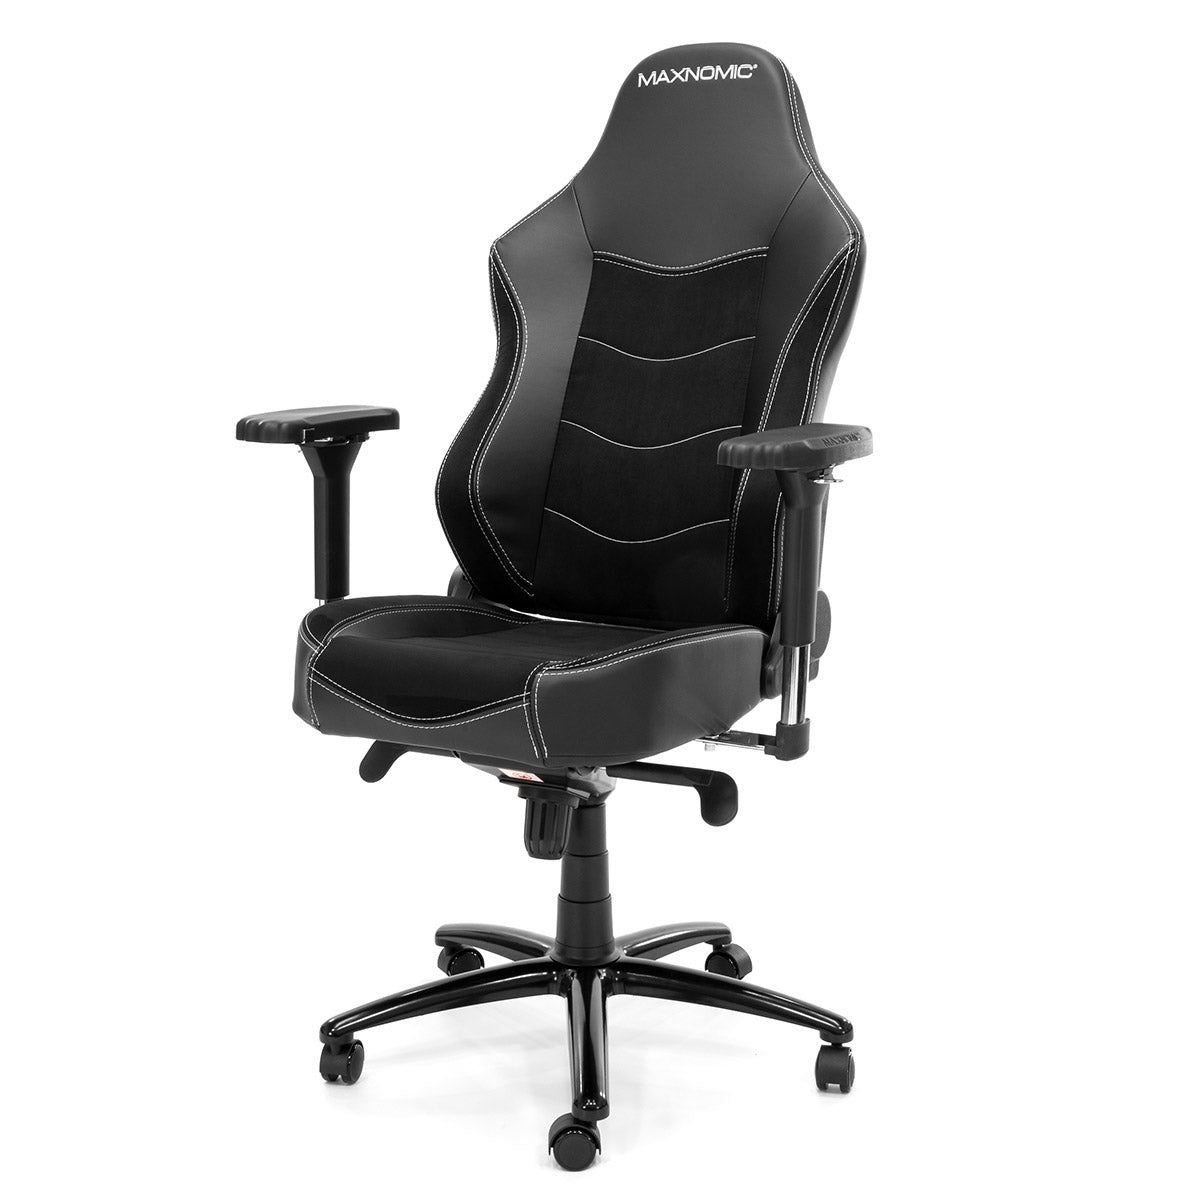 Maxnomic (Xbox Partner) released a special chair for Xbox events